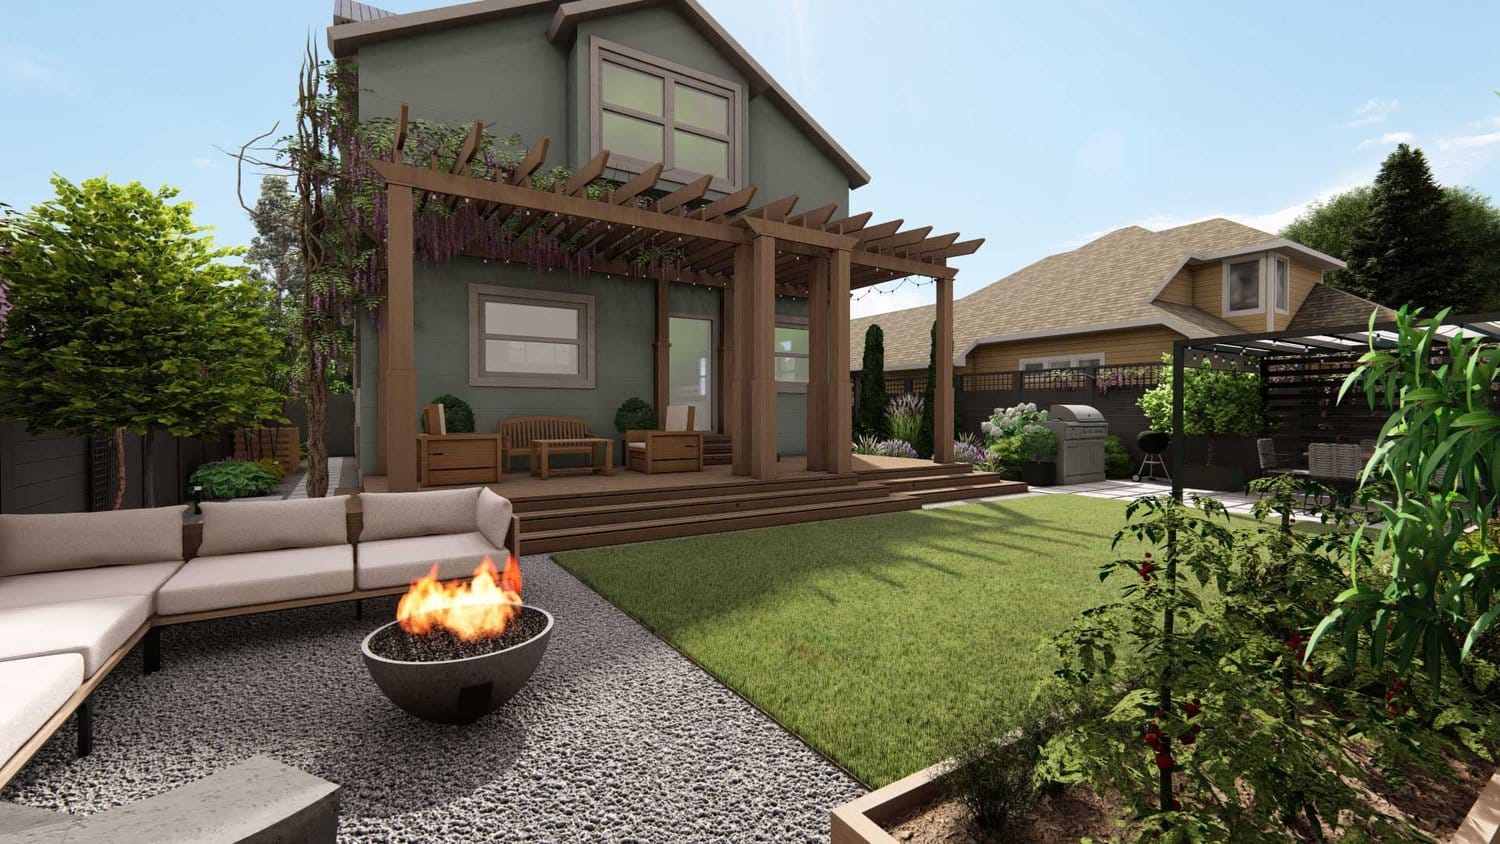 Tacoma Yard with trellis, lawn, sitting area on gravel and a fire pit